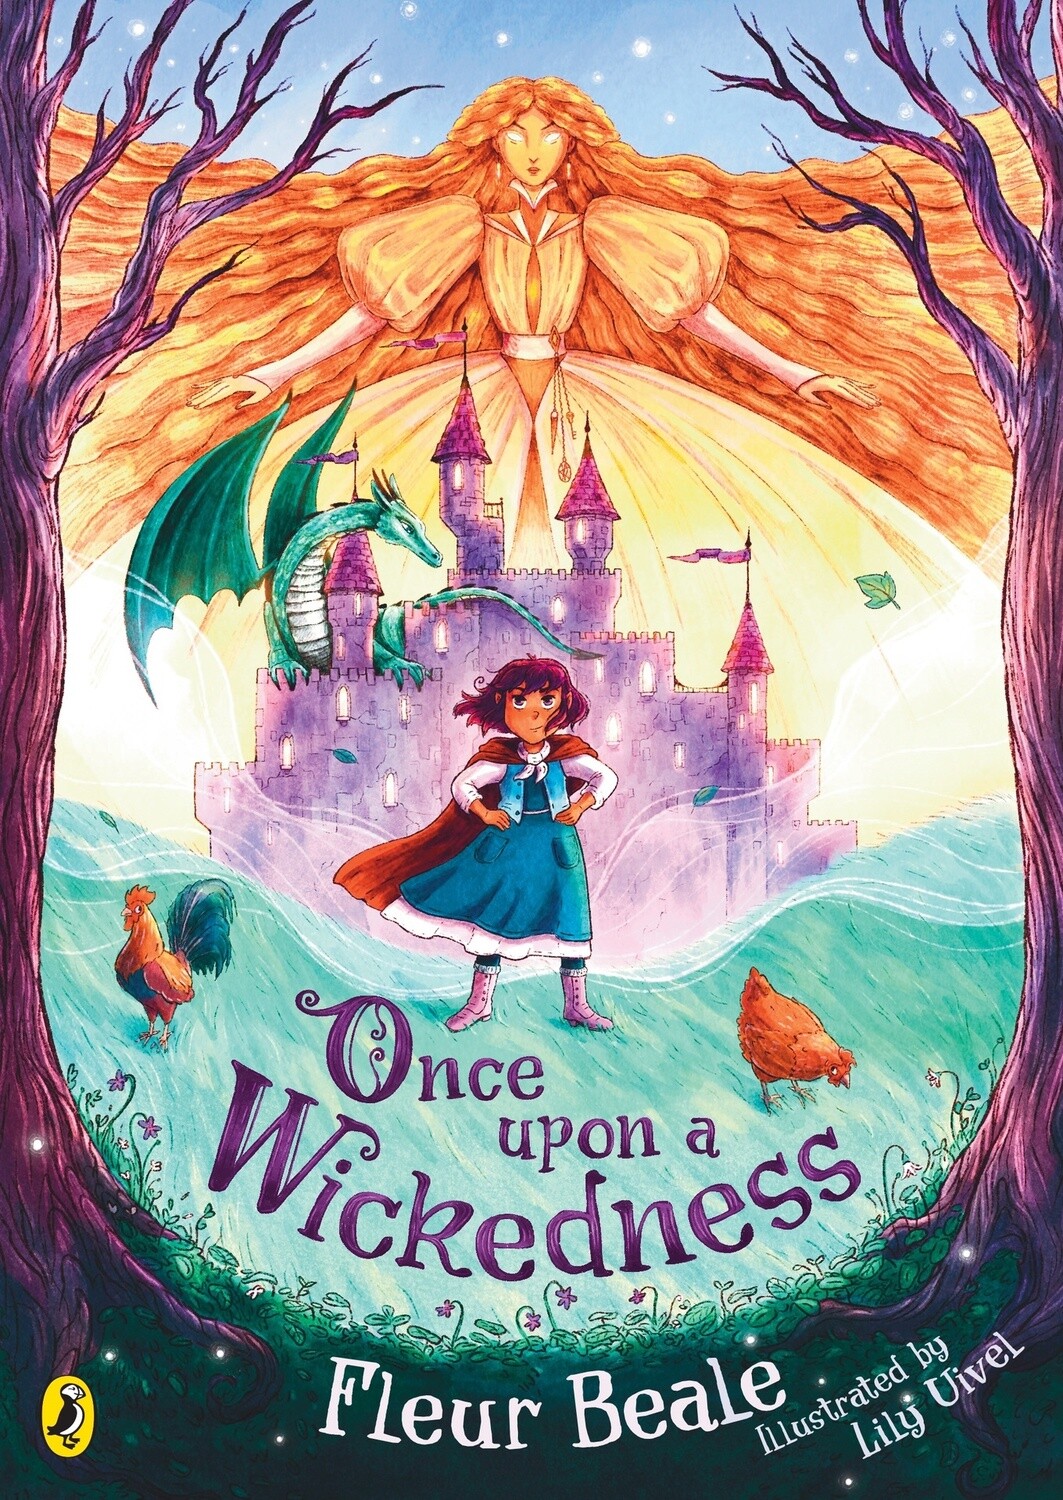 Once Upon a Wickedness by Fleur Beale